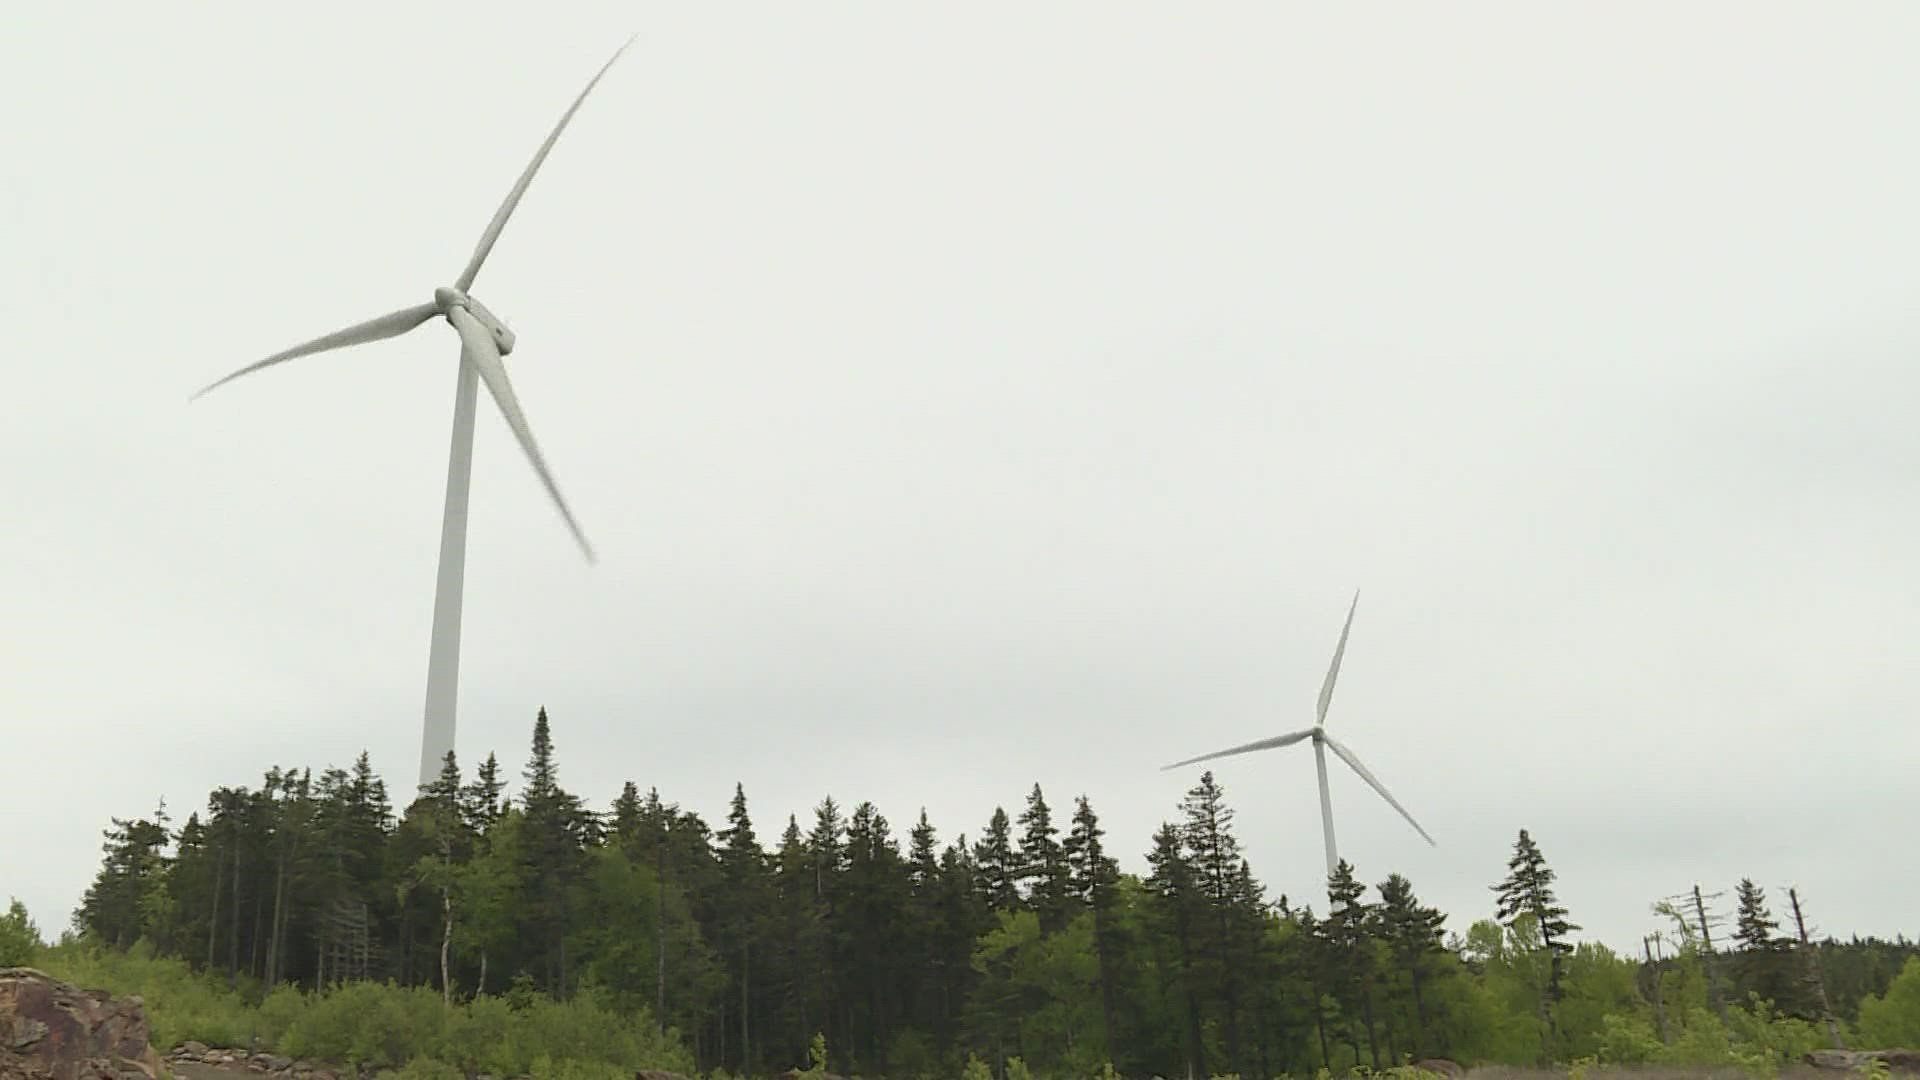 Environmentalists say work is being done to find alternative uses for turbine blades once their lifespan expires.